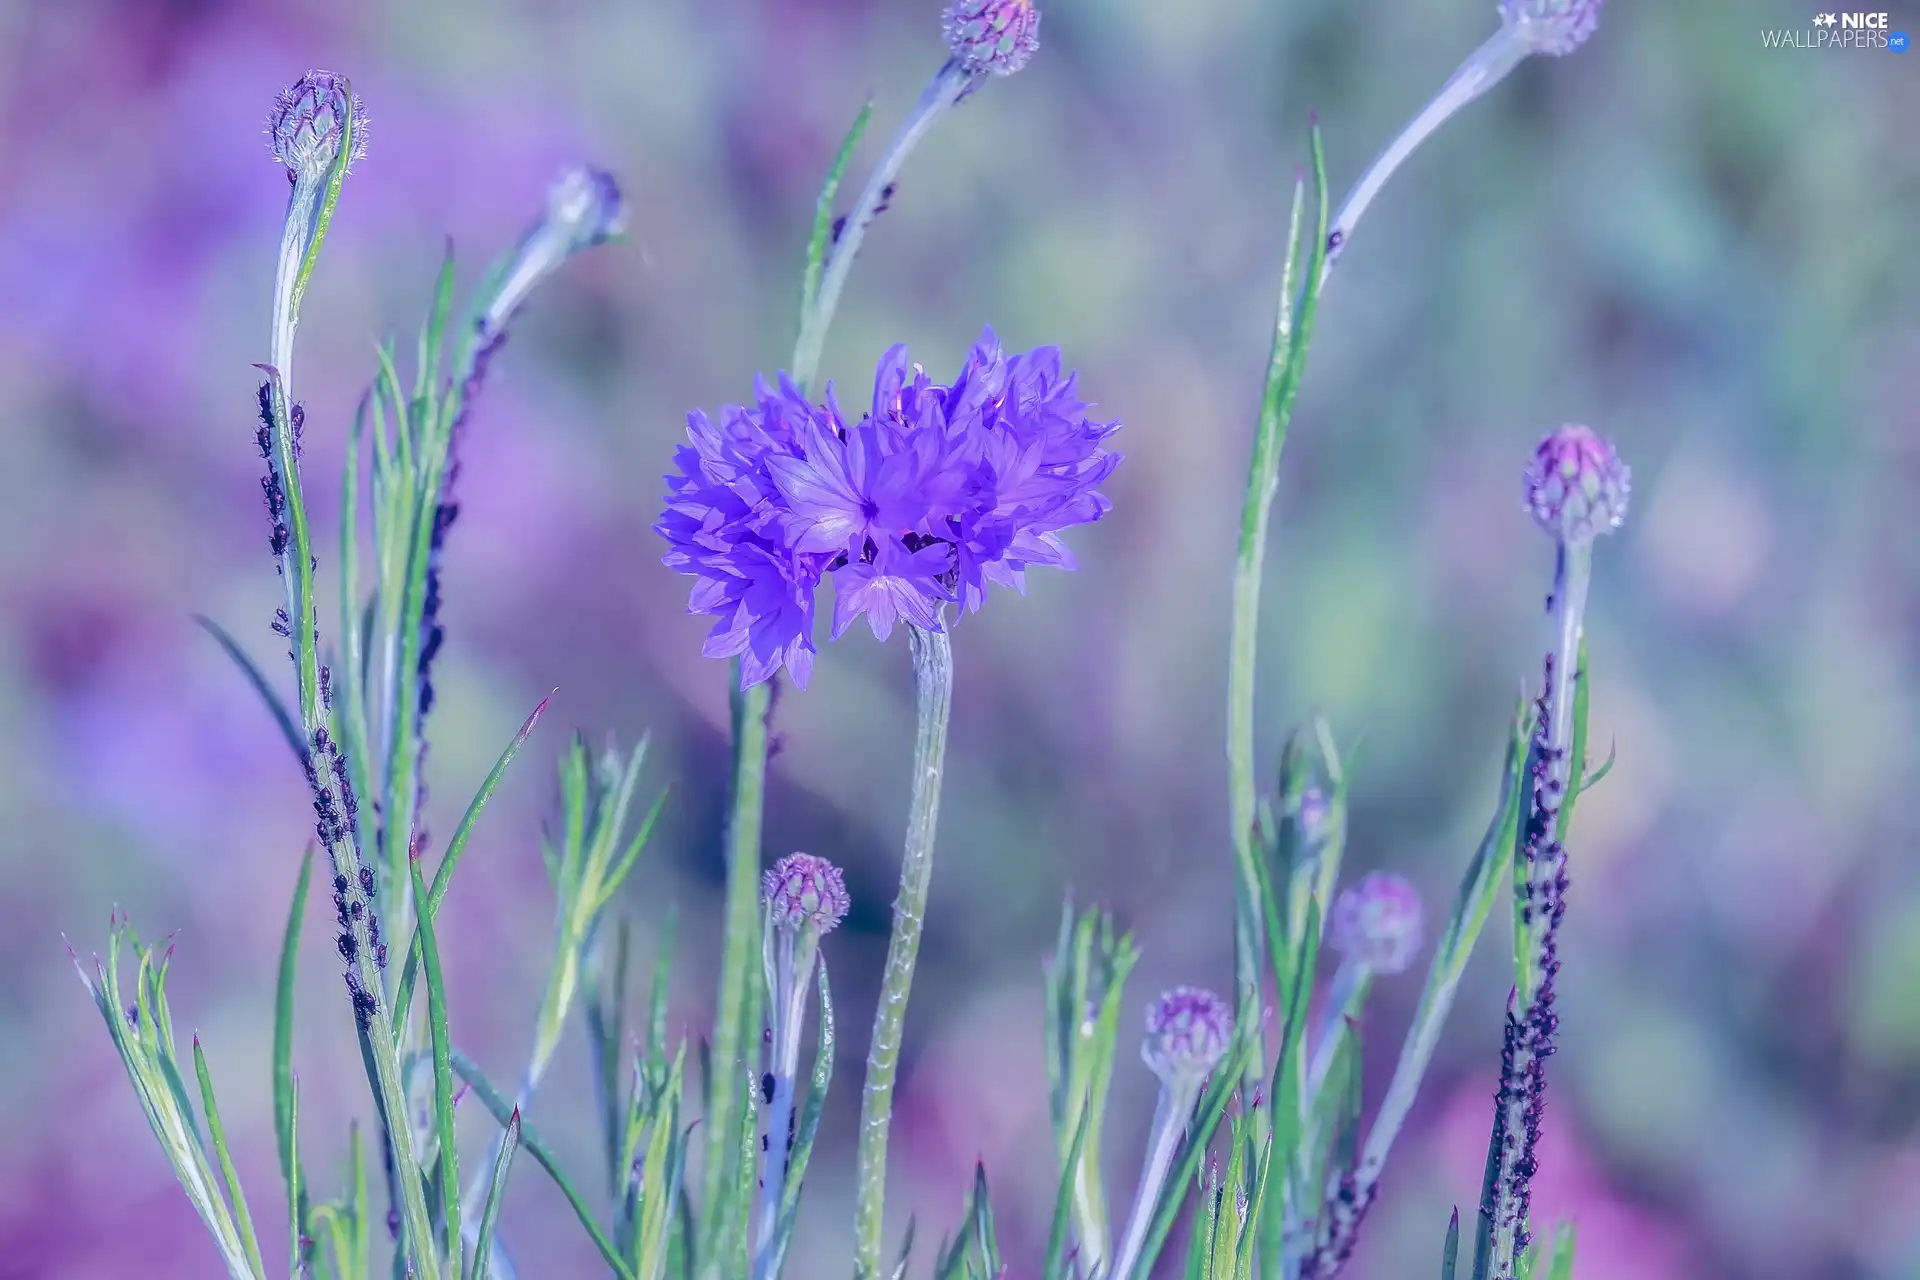 blurry background, cornflowers, insects